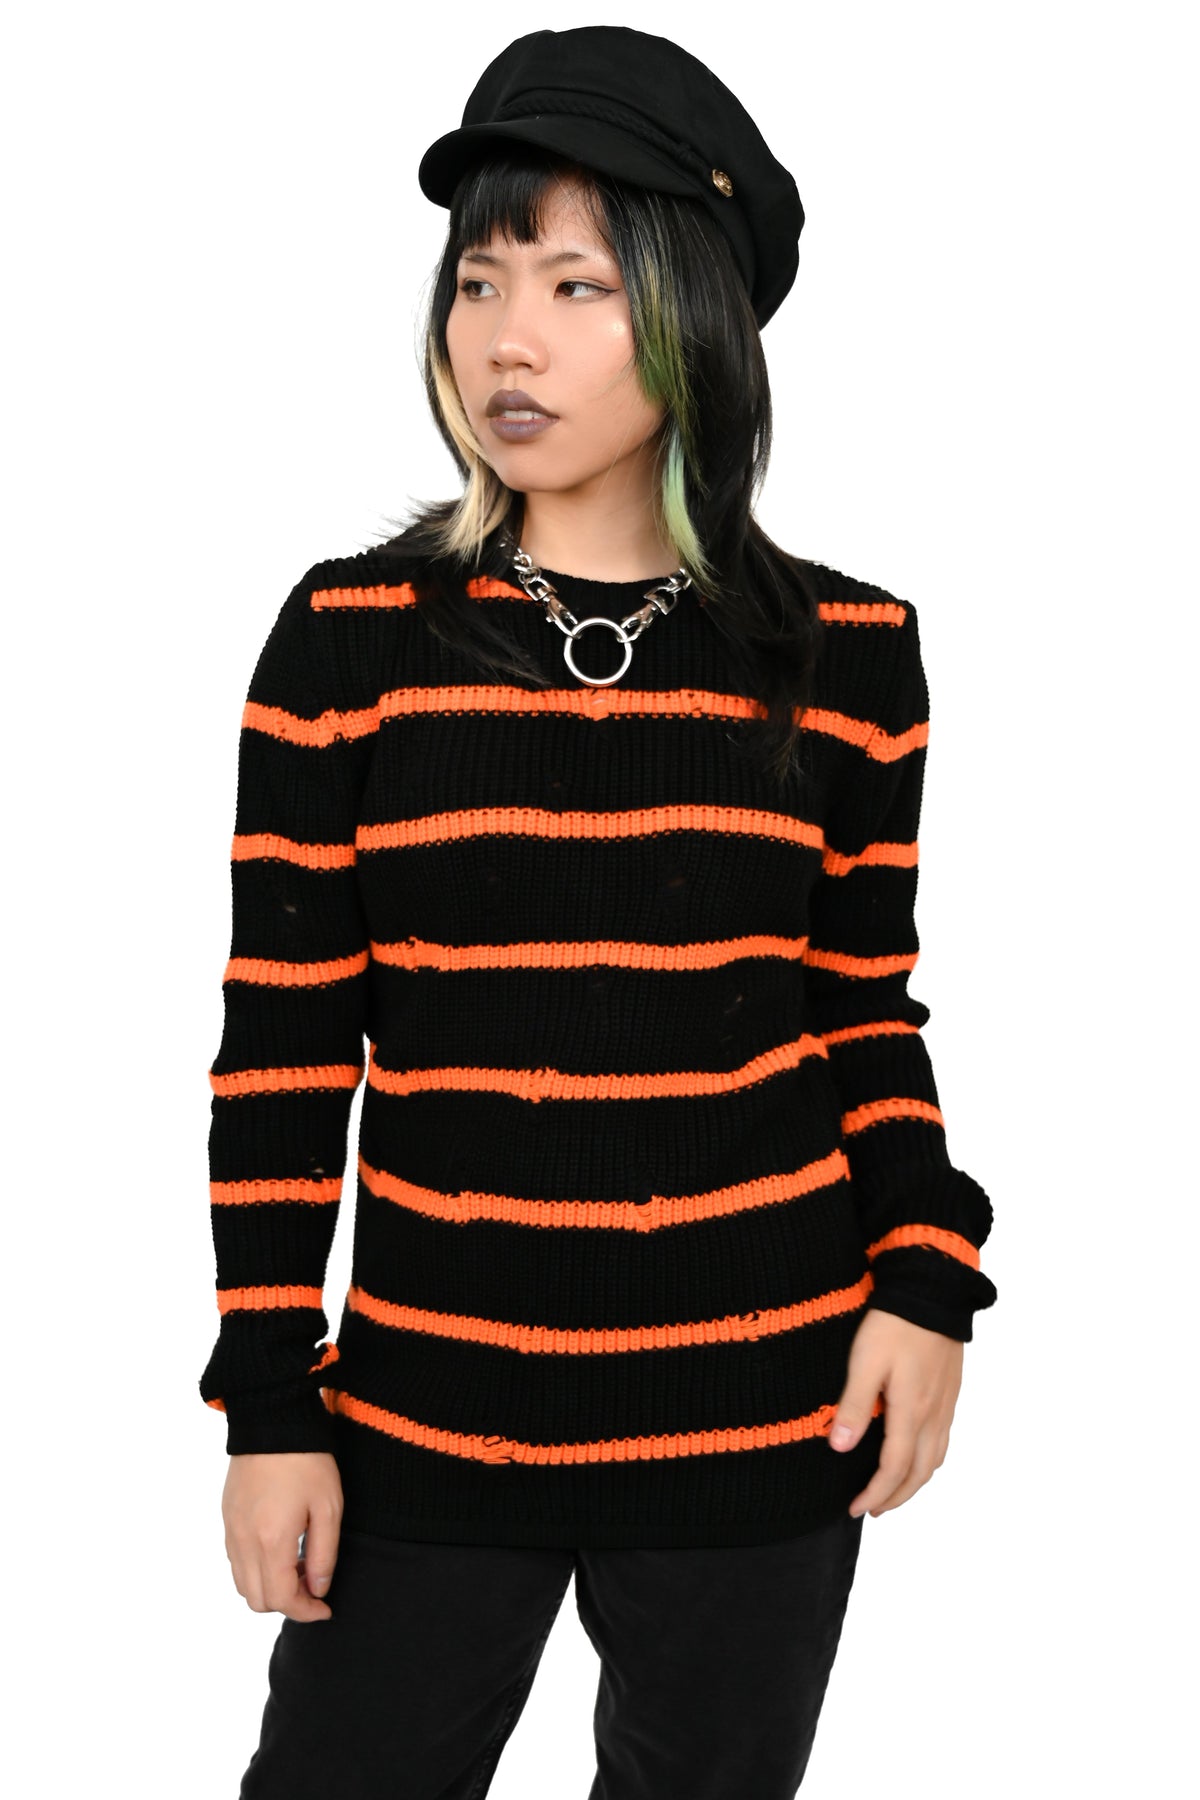 Myers Striped Sweater - XS/S left!